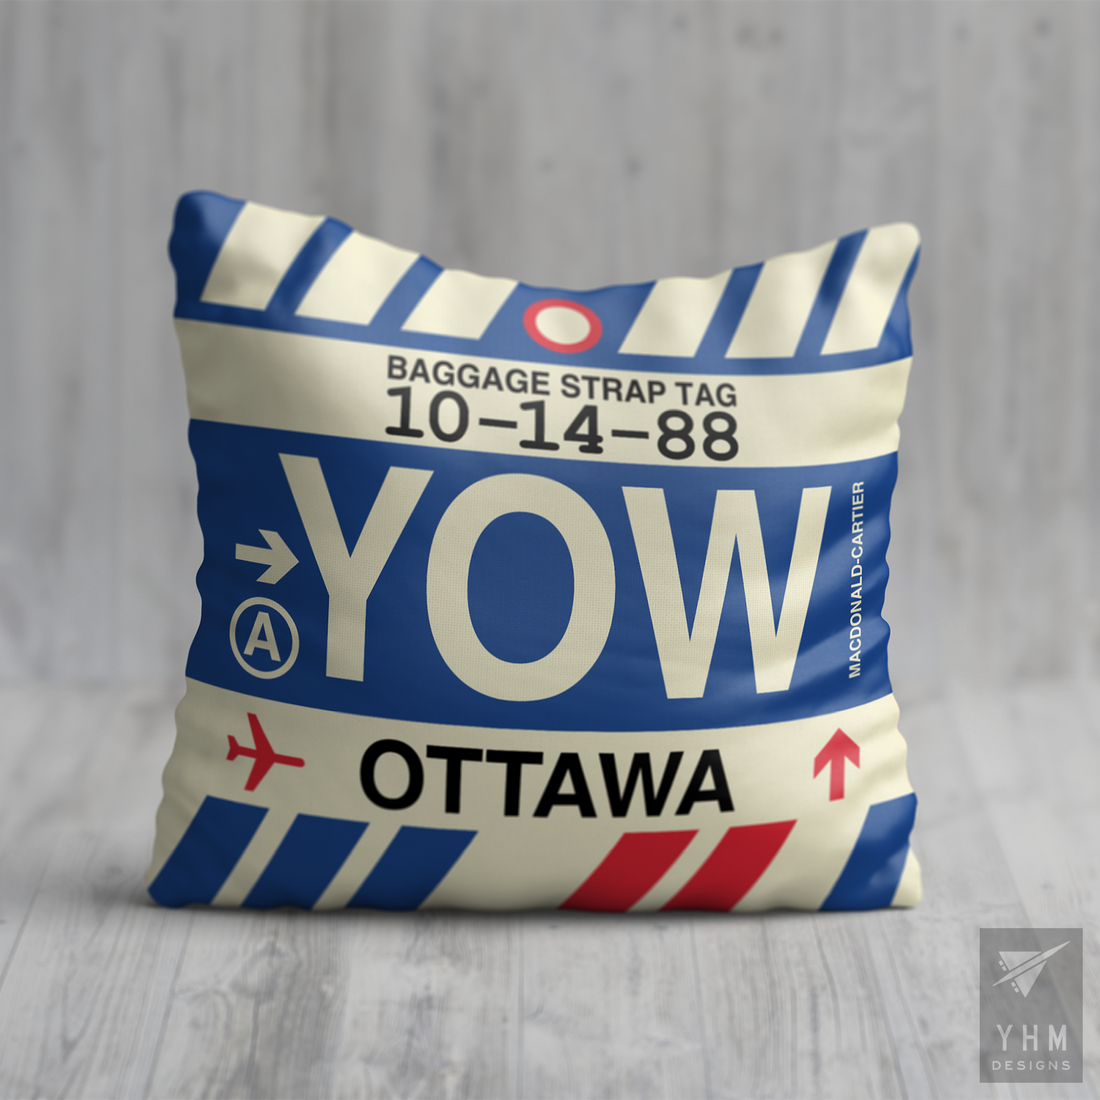 Ottawa Gift Ideas • Wall Art & Home Decor Featuring the YOW Airport Code